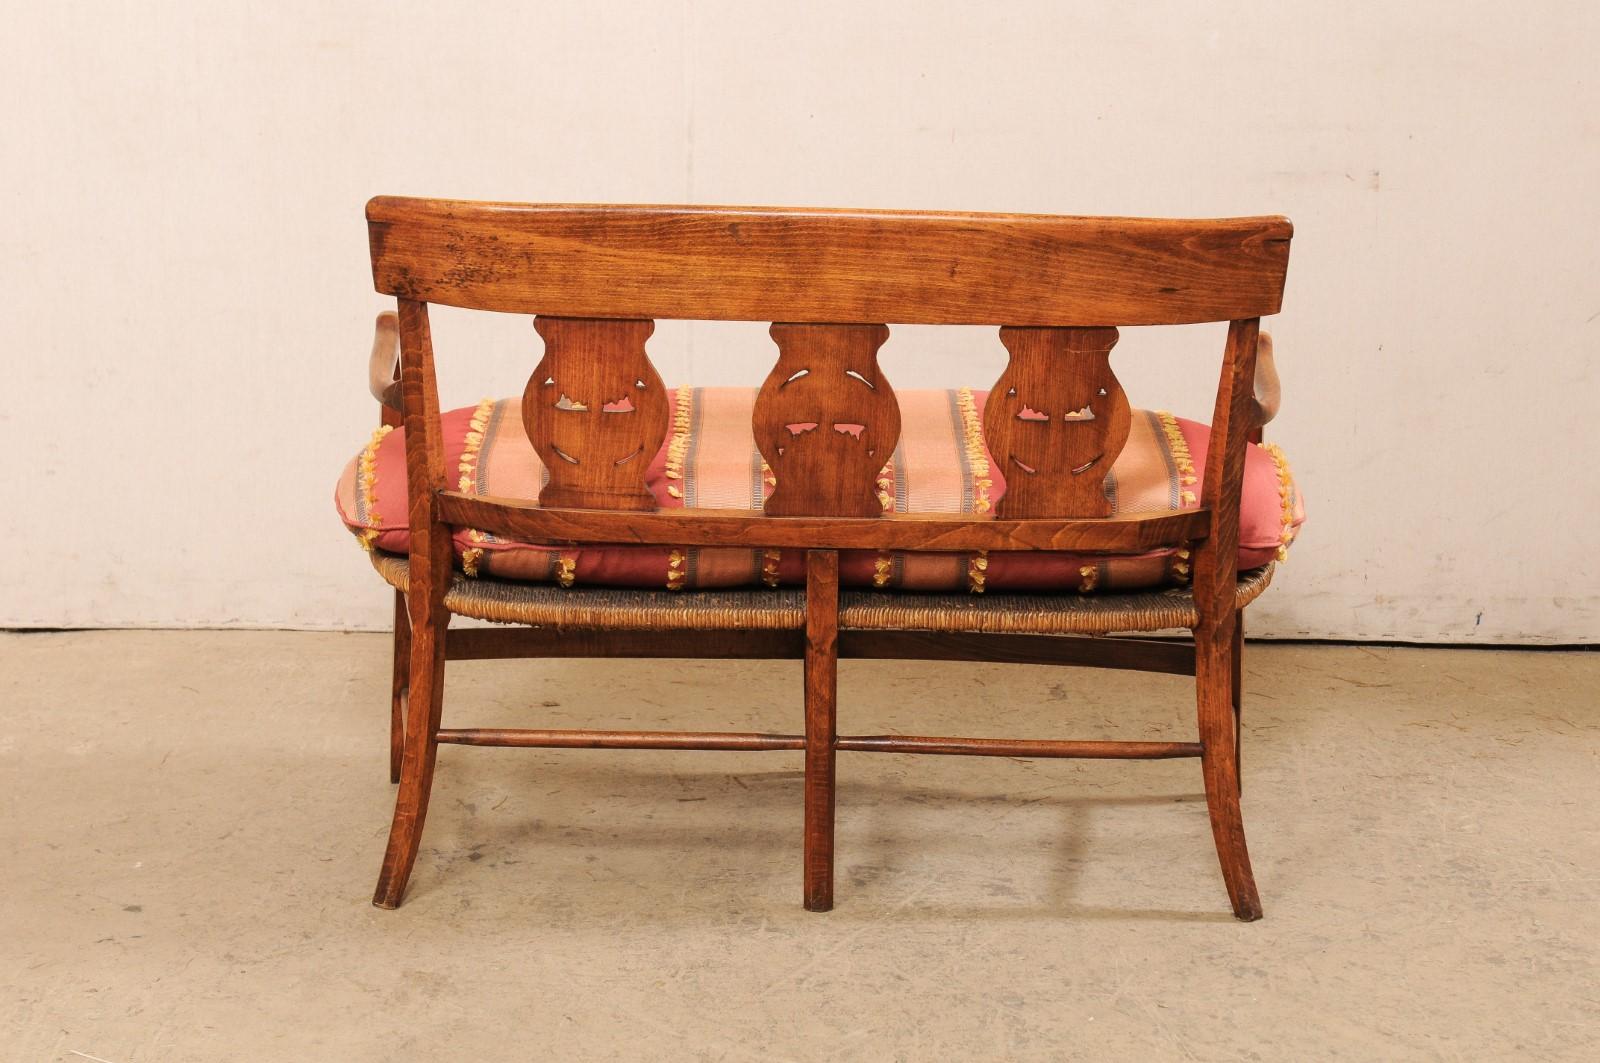 19th Century French Country Bench W/Neoclassic Elements Has Rushed Seat & Upholstered Cushion